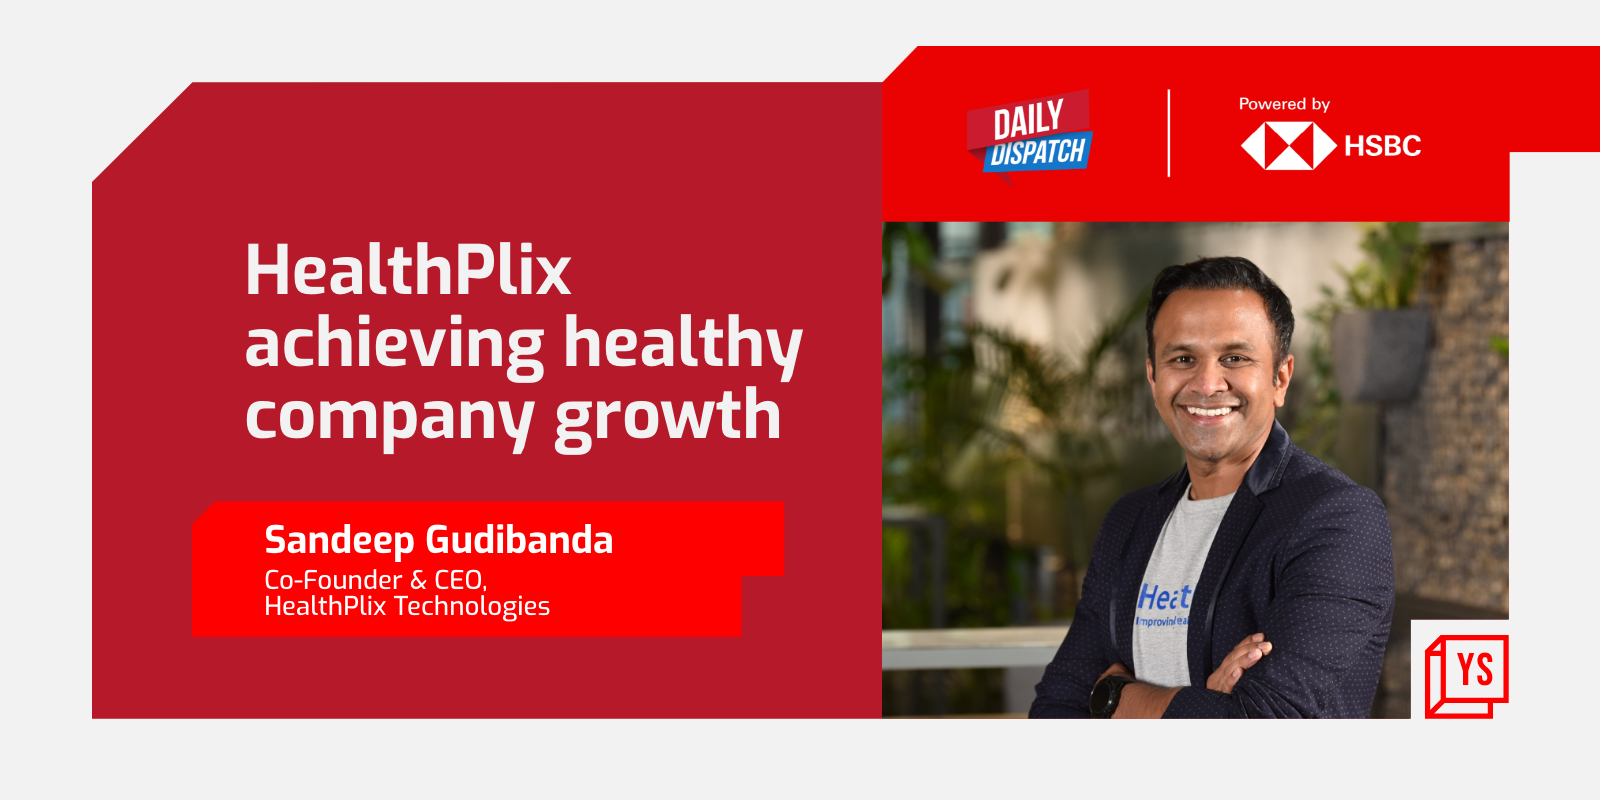 Healthplix aspires to enhance well-being outcomes by digitising healthcare 

